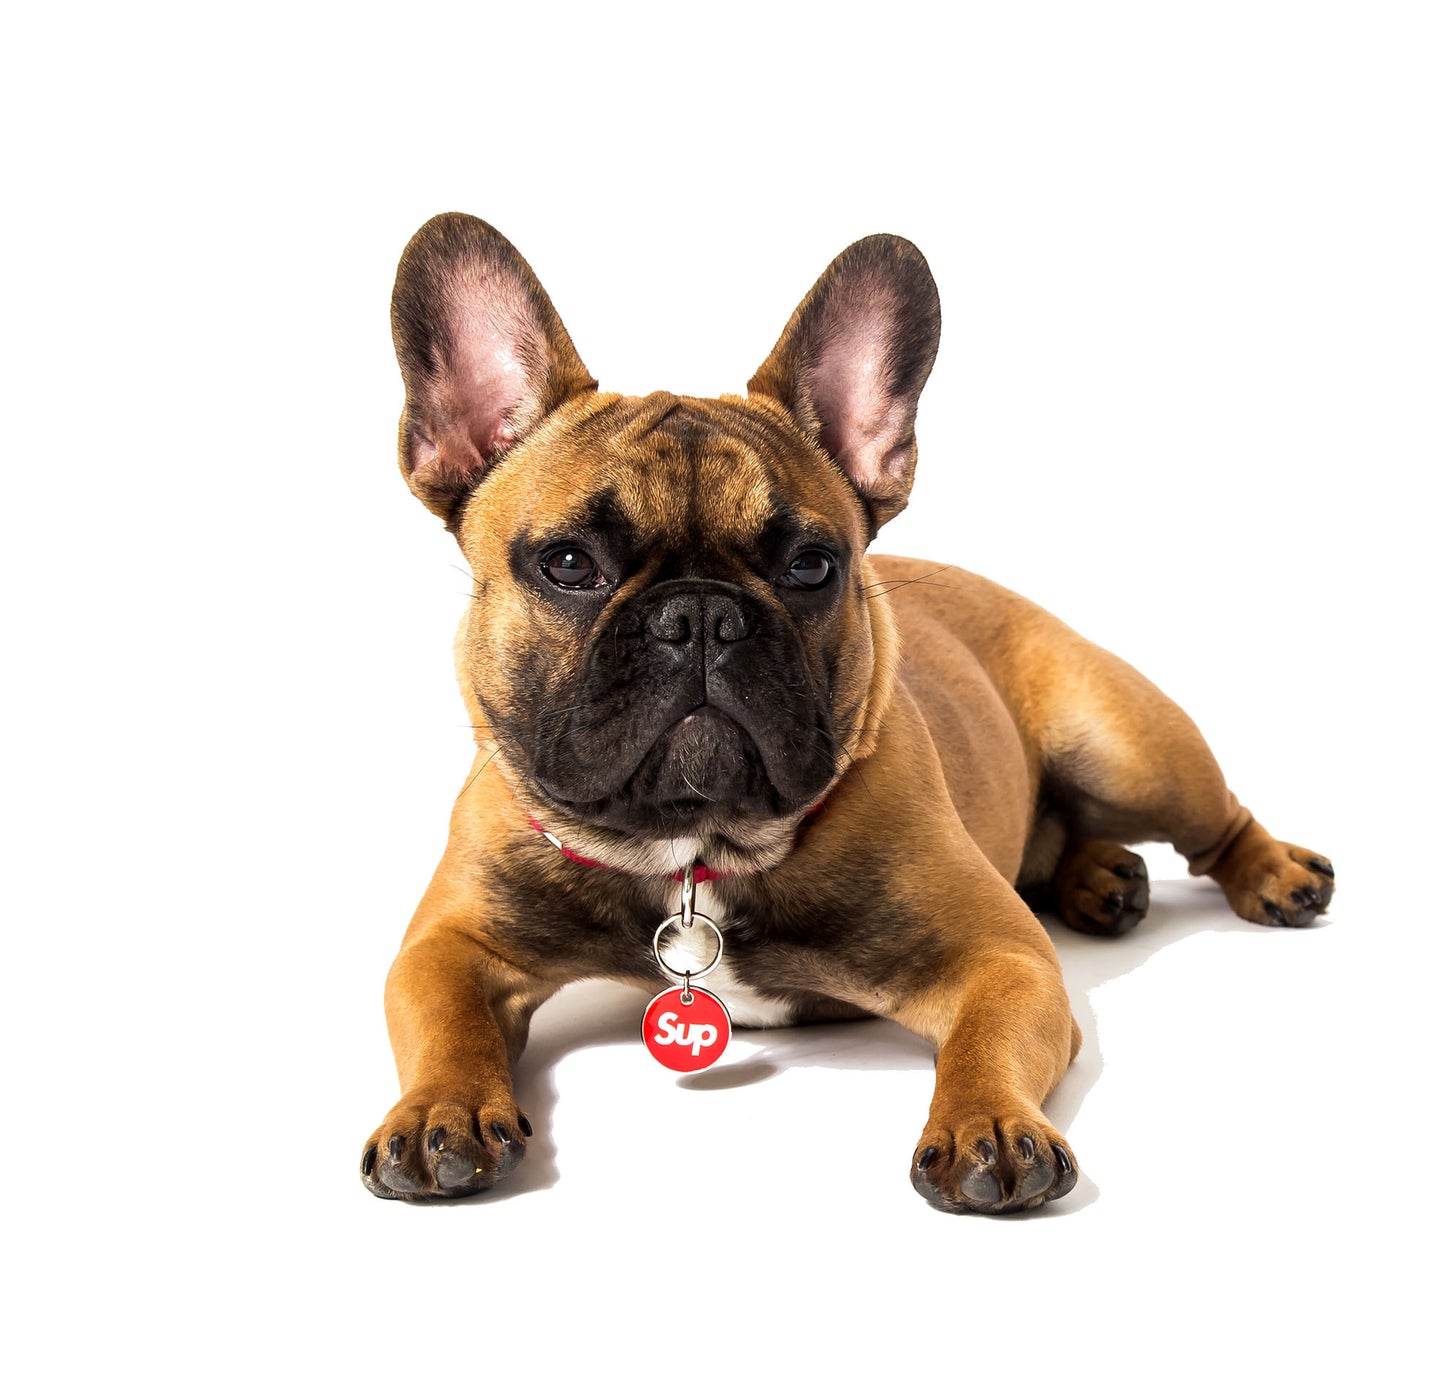 Sup red and white enamel pet ID tag on fawn French Bulldog | Trill Paws 